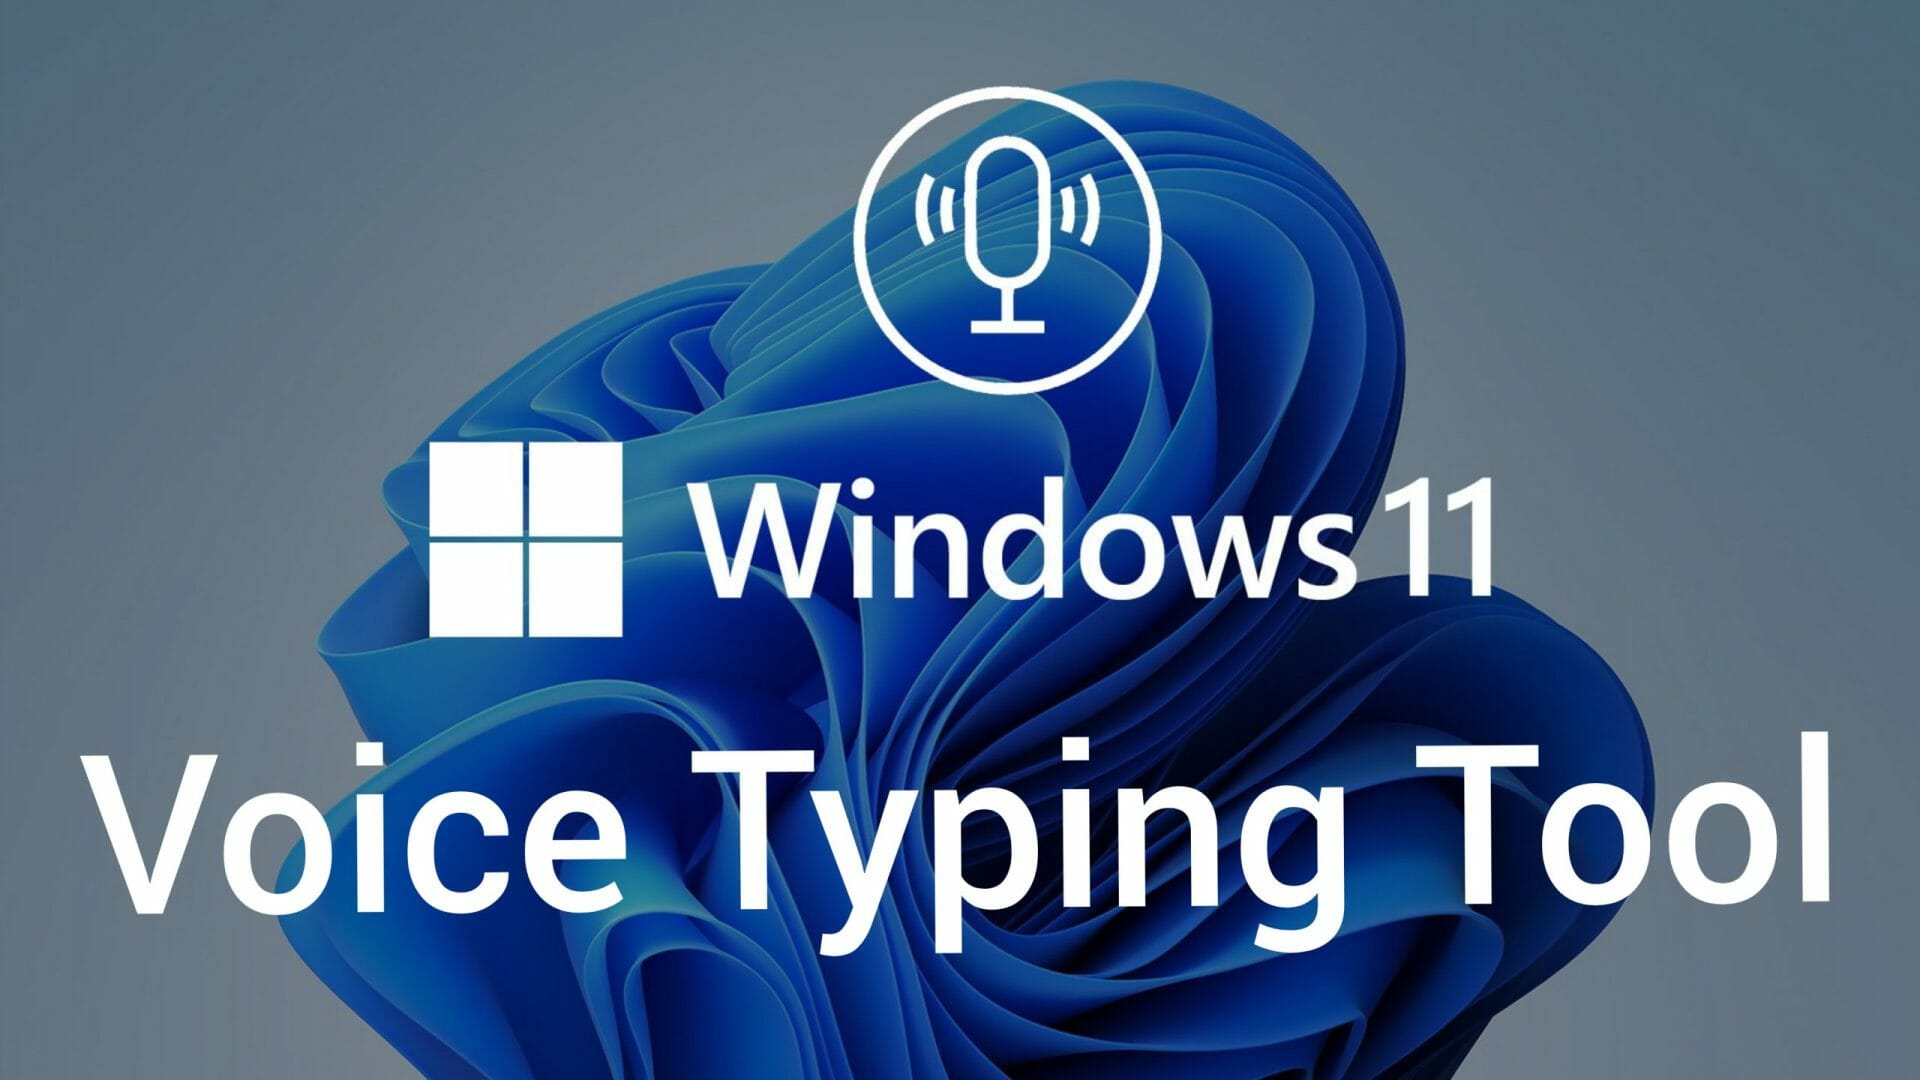 How to use the Voice Typing tool in Windows 11 Complete Guide